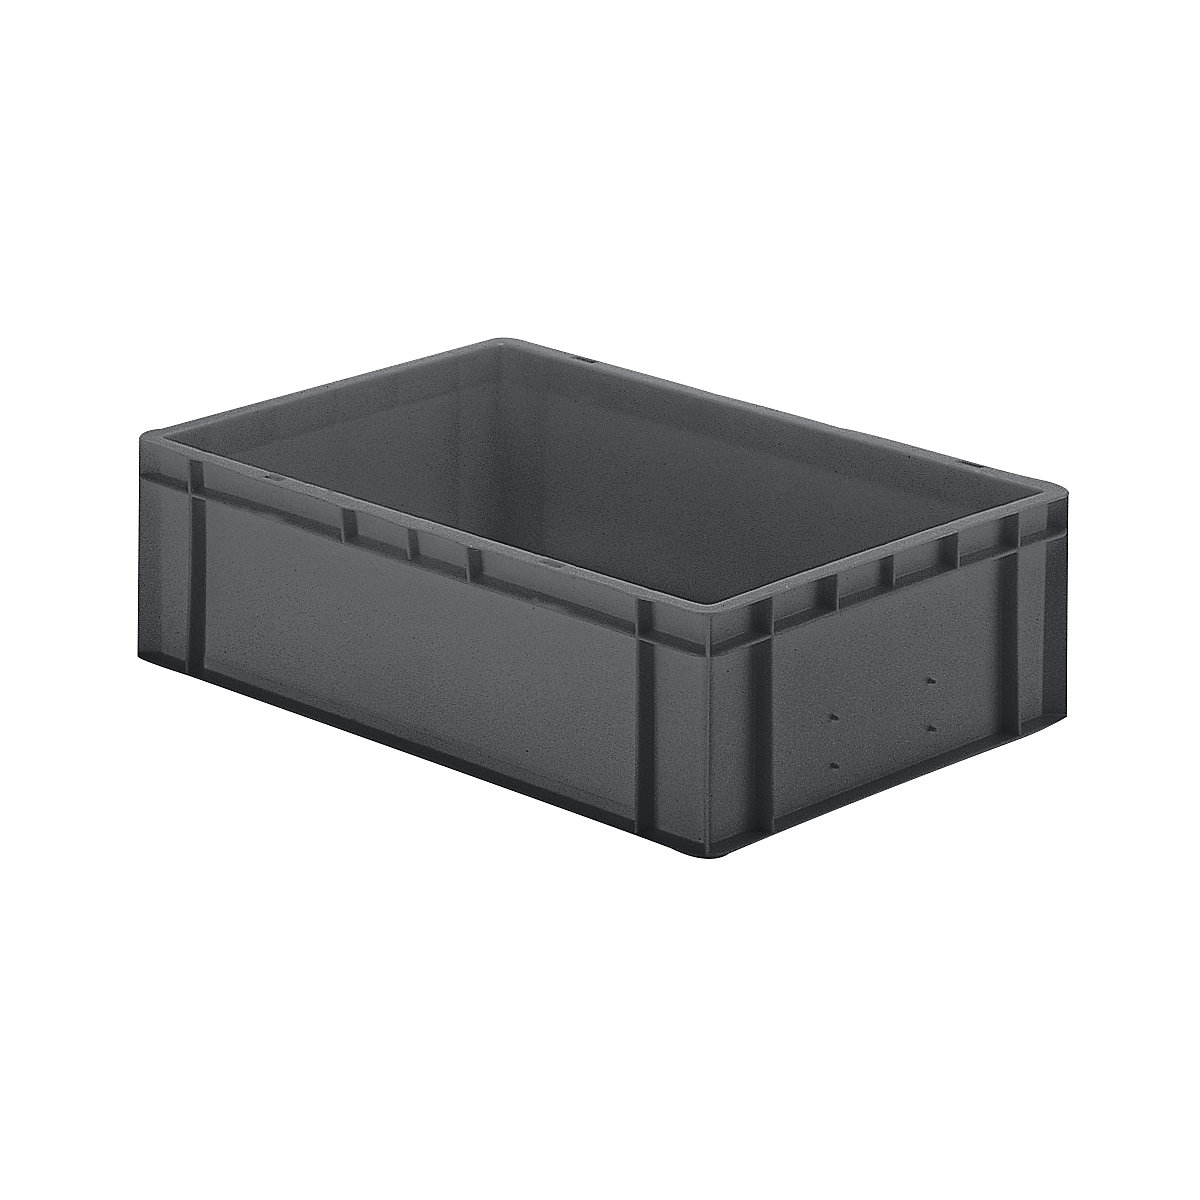 Euro stacking container, closed walls and base, LxWxH 600 x 400 x 175 mm, grey, pack of 5